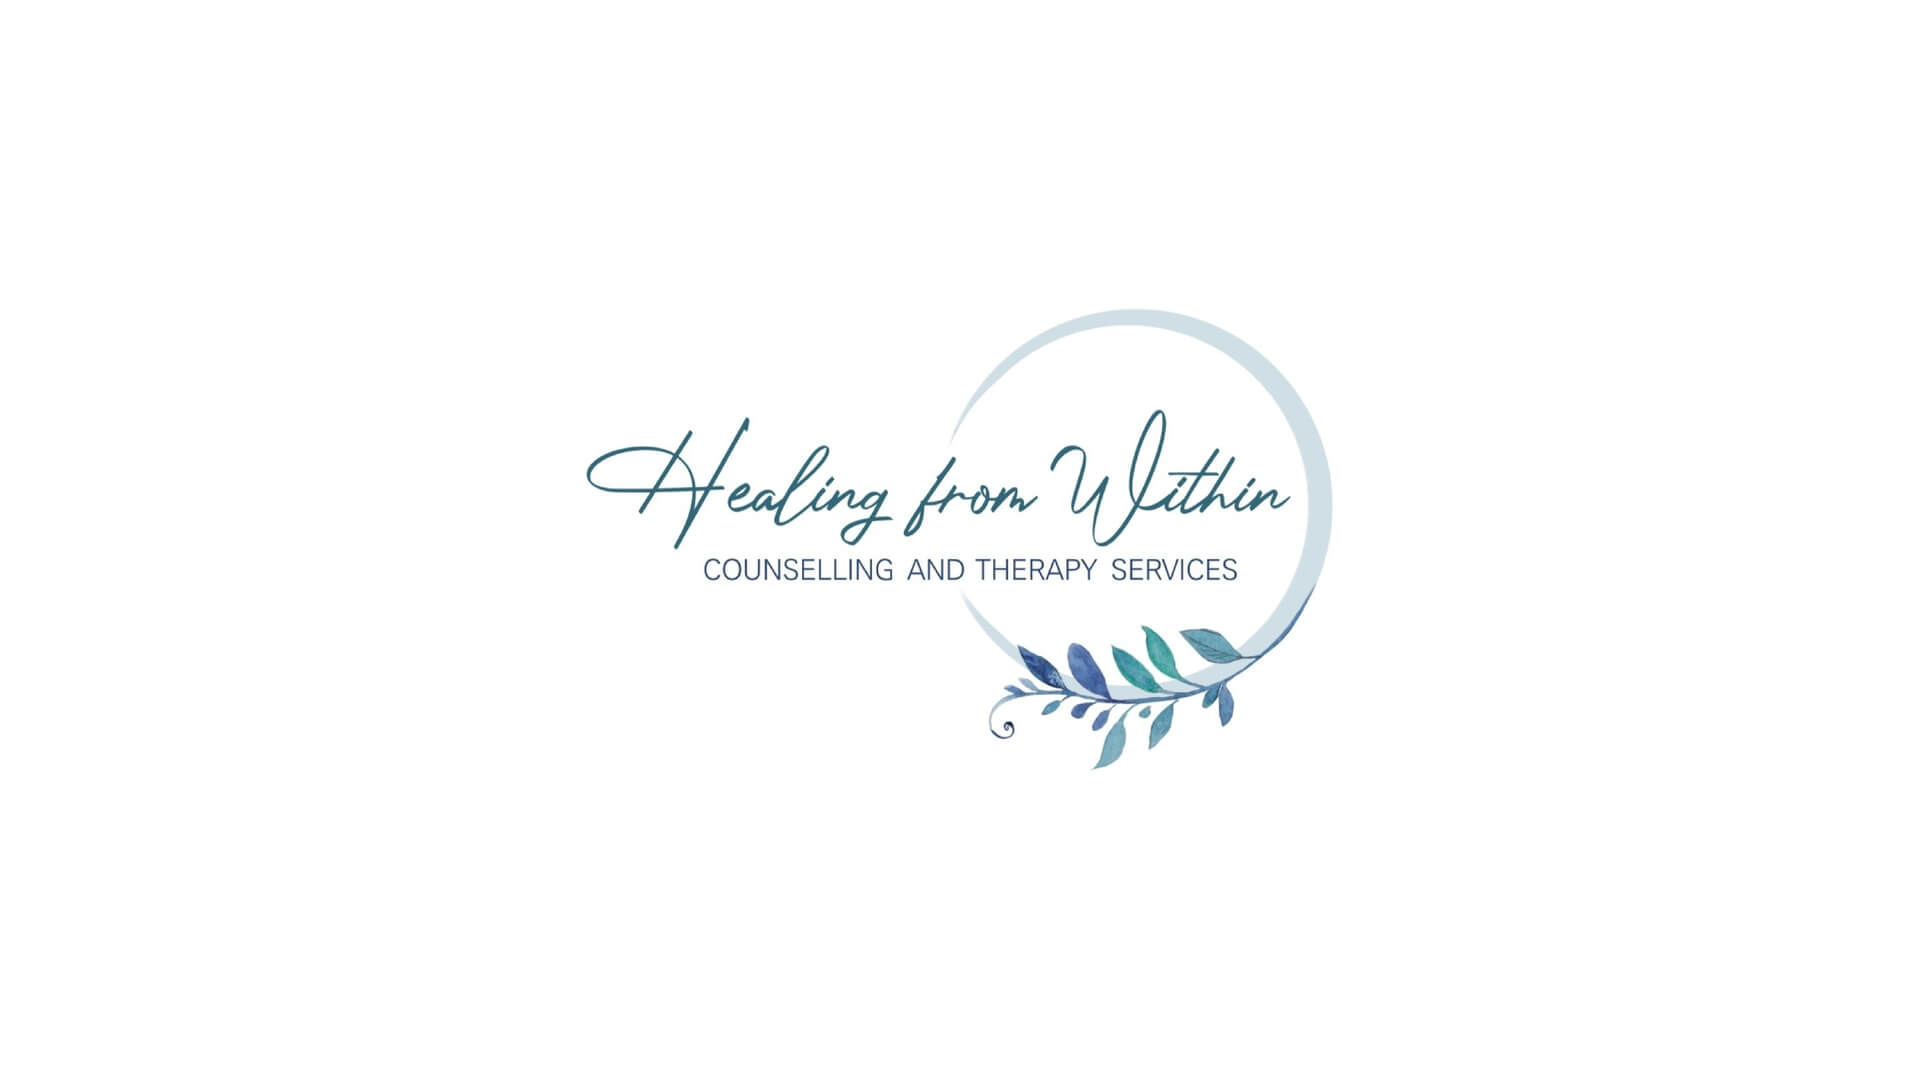 Timmins Care Logo of "healing from within," featuring a stylized circle with text and a botanical element, in a soothing blue and green color scheme. Cochrane District Social Services Administration Board